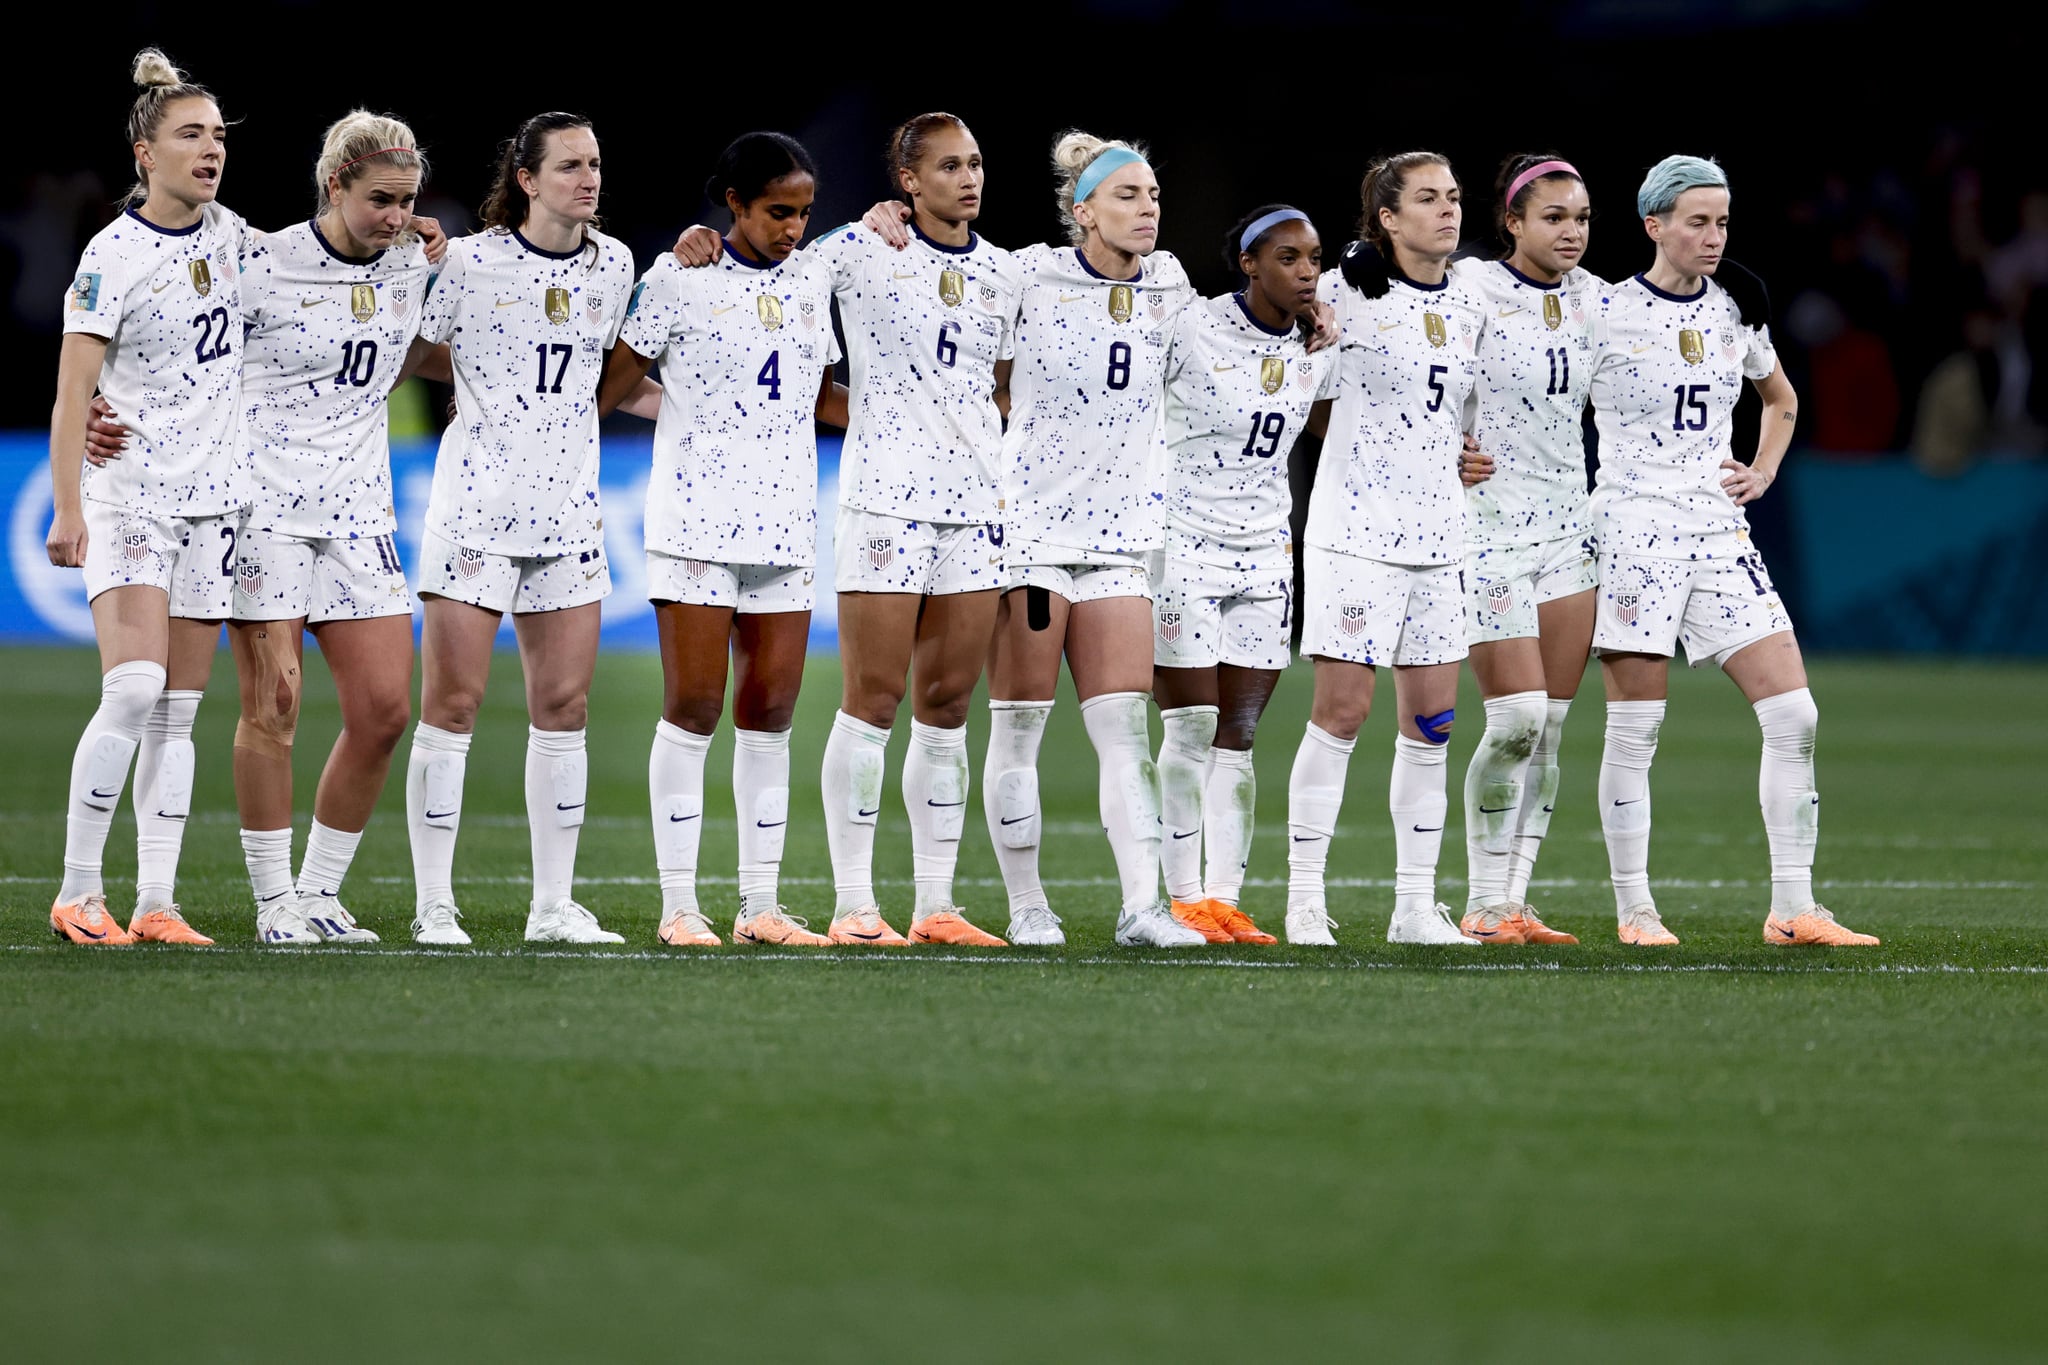 MELBOURNE, AUSTRALIA - AUGUST 06: Megan Rapinoe #15, Kristie Mewis #22, Andi Sullivan #17, Crystal Dunn #19, Lindsey Horan #10, Lynn Williams #6, Naomi Girma #4, Kelley O'Hara #5, and Julie Ertz #8 of the United States react during the penalty kick shootout during the FIFA Women's World Cup Australia & New Zealand 2023 Round of 16 match between Winner Group G and Runner Up Group E at Melbourne Rectangular Stadium on August 06, 2023 in Melbourne, Australia. (Photo by Carmen Mandato/USSF/Getty Images for USSF)